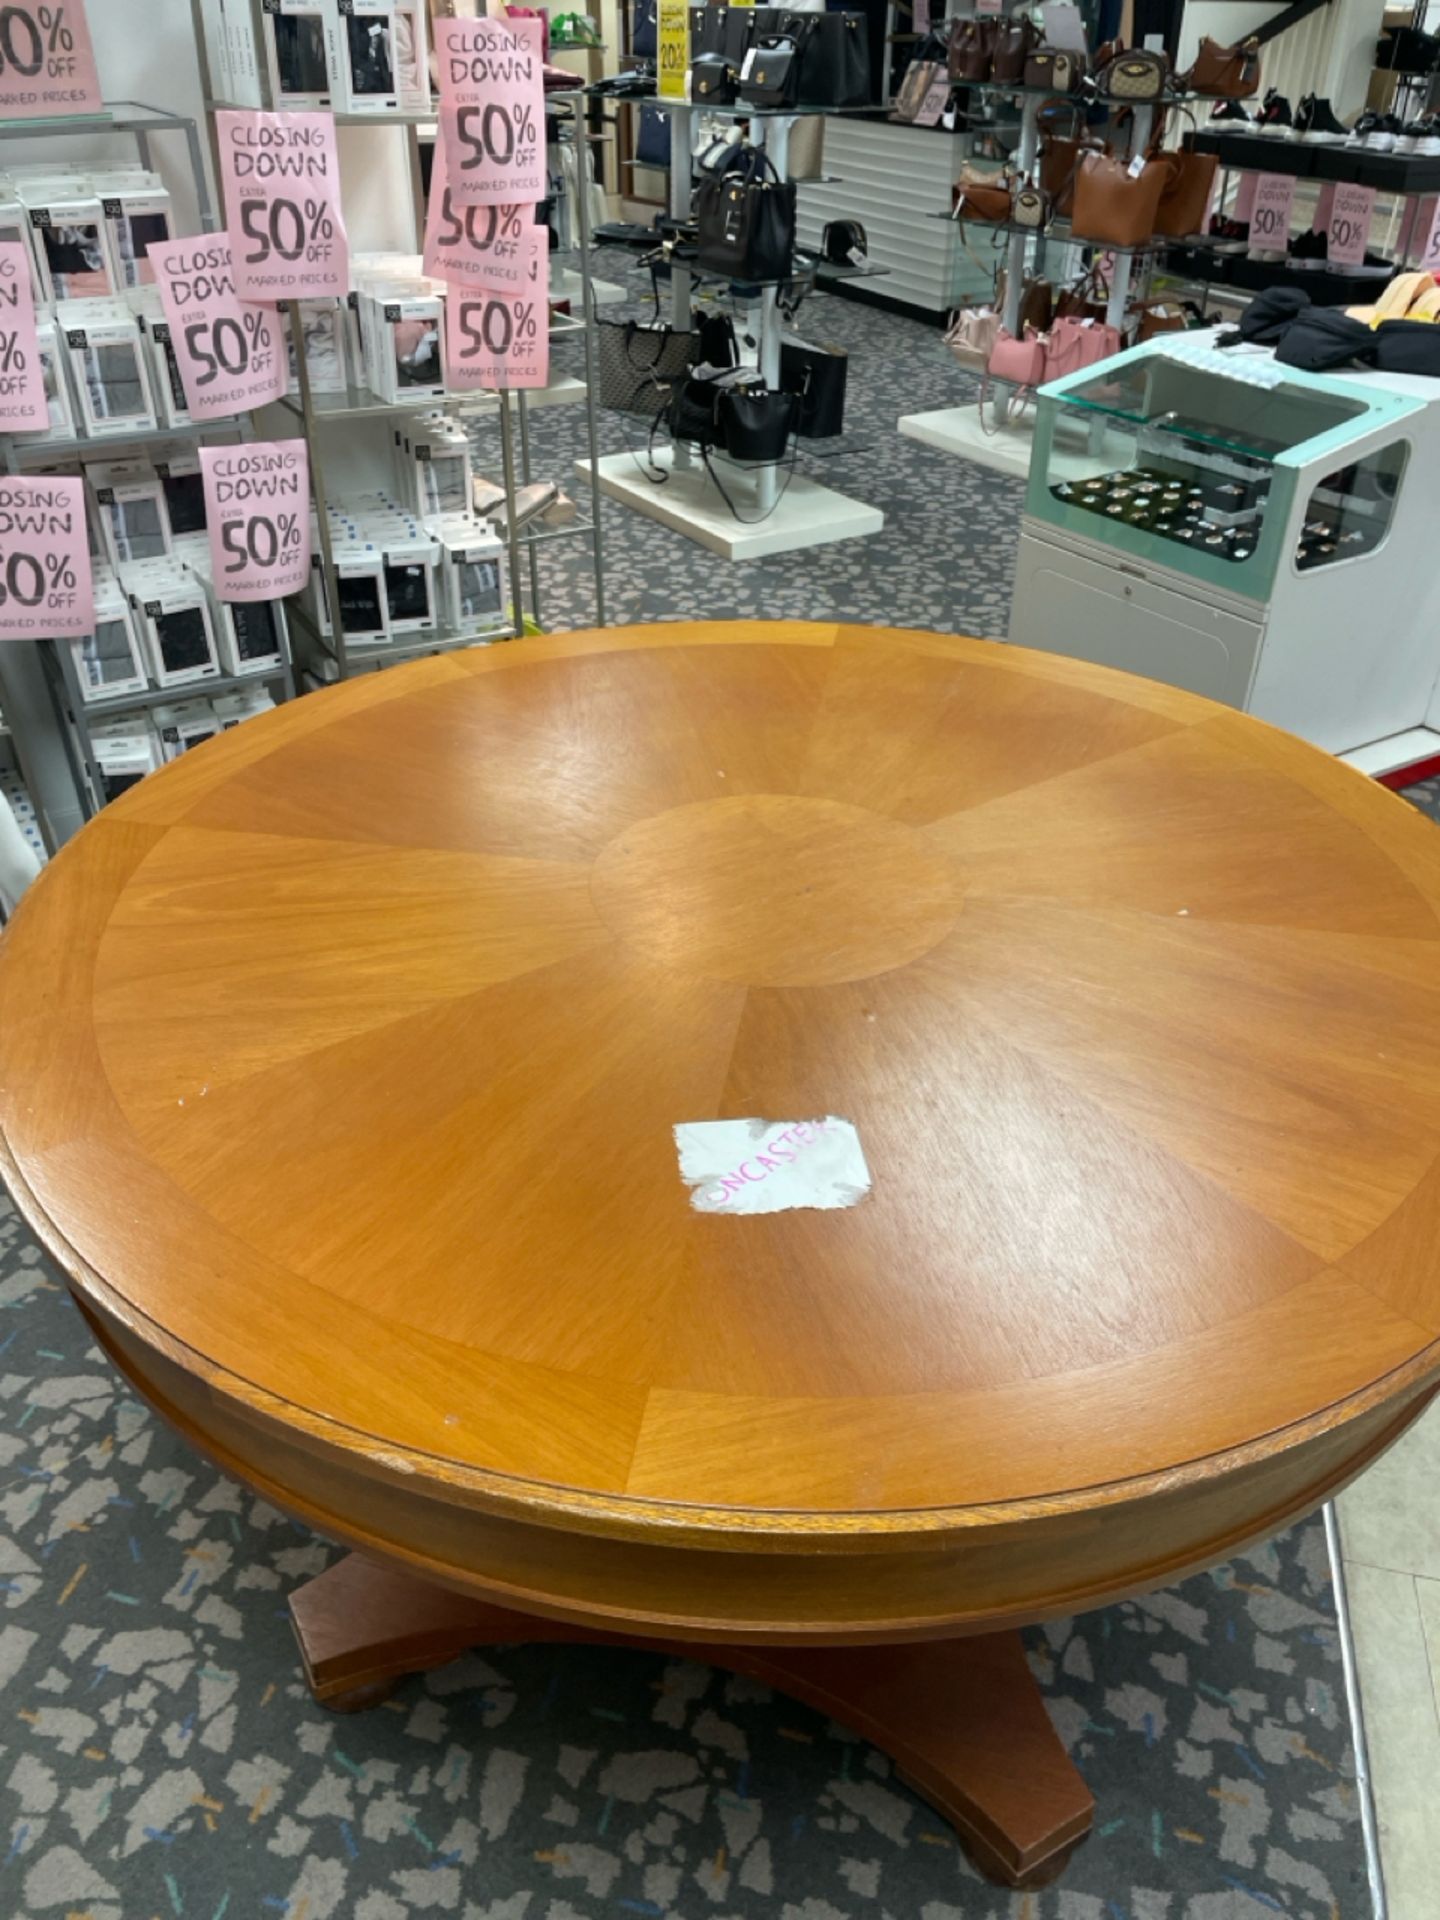 Wooden Round Pedestal Table - Image 2 of 5